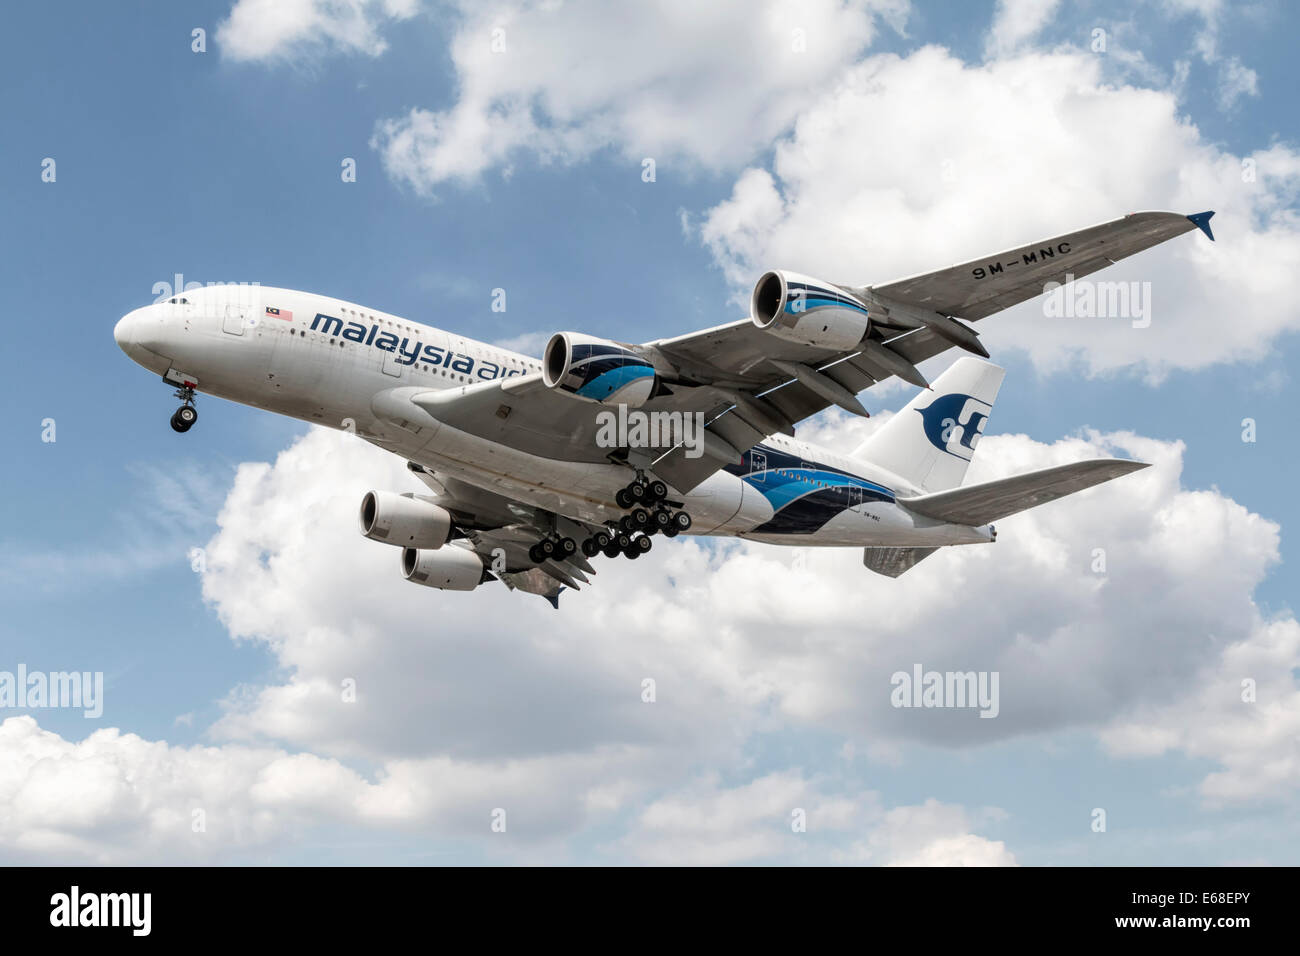 An Airbus A380 super jumbo of Malaysia airlines Stock Photo